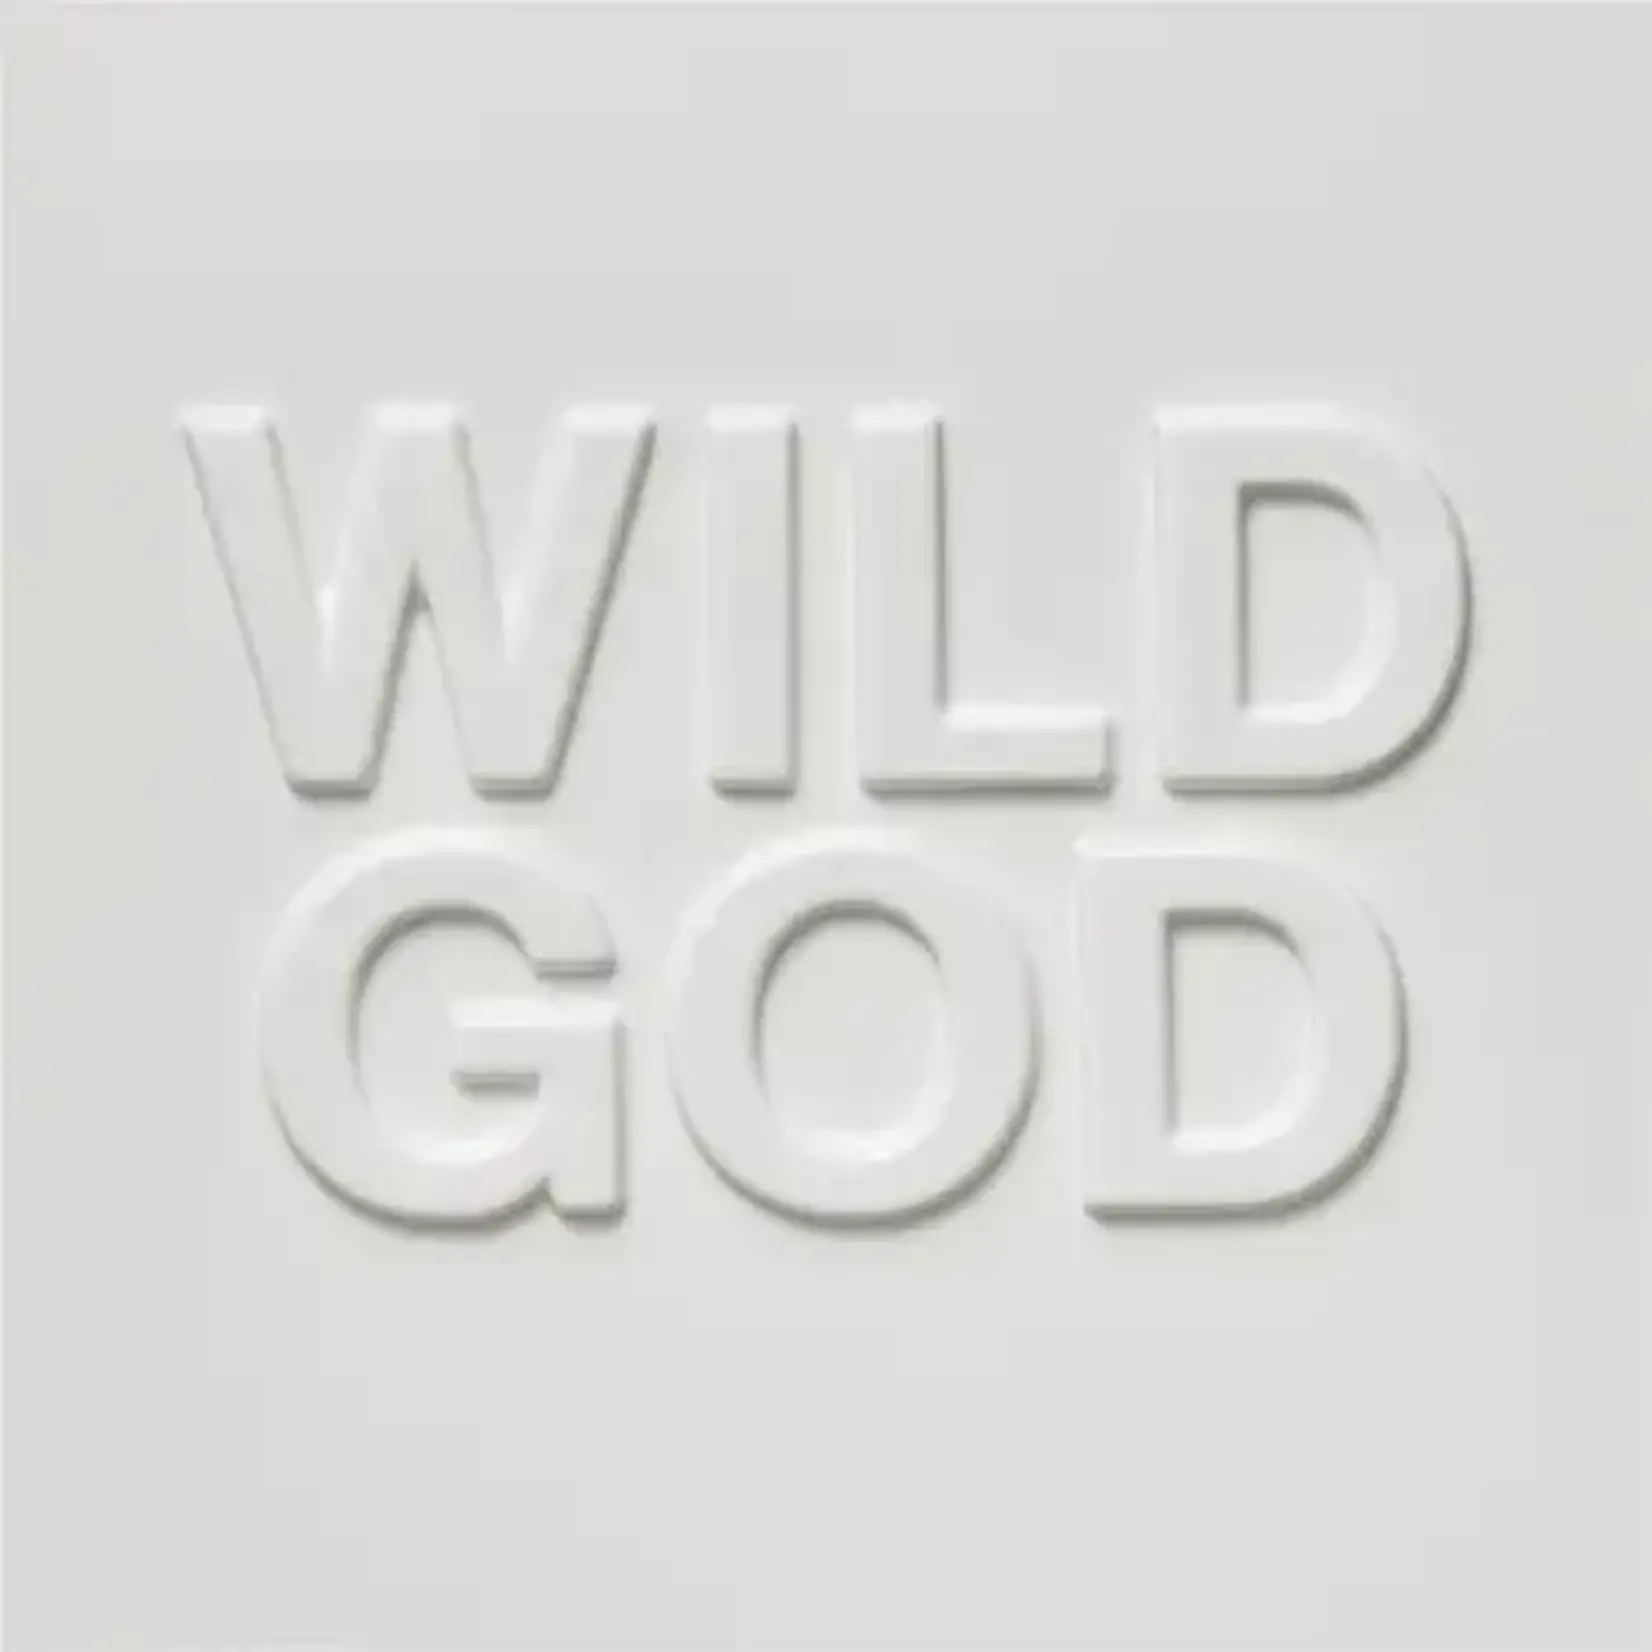 [PIAS] Nick Cave And The Bad Seeds - Wild God (LP) [Clear]